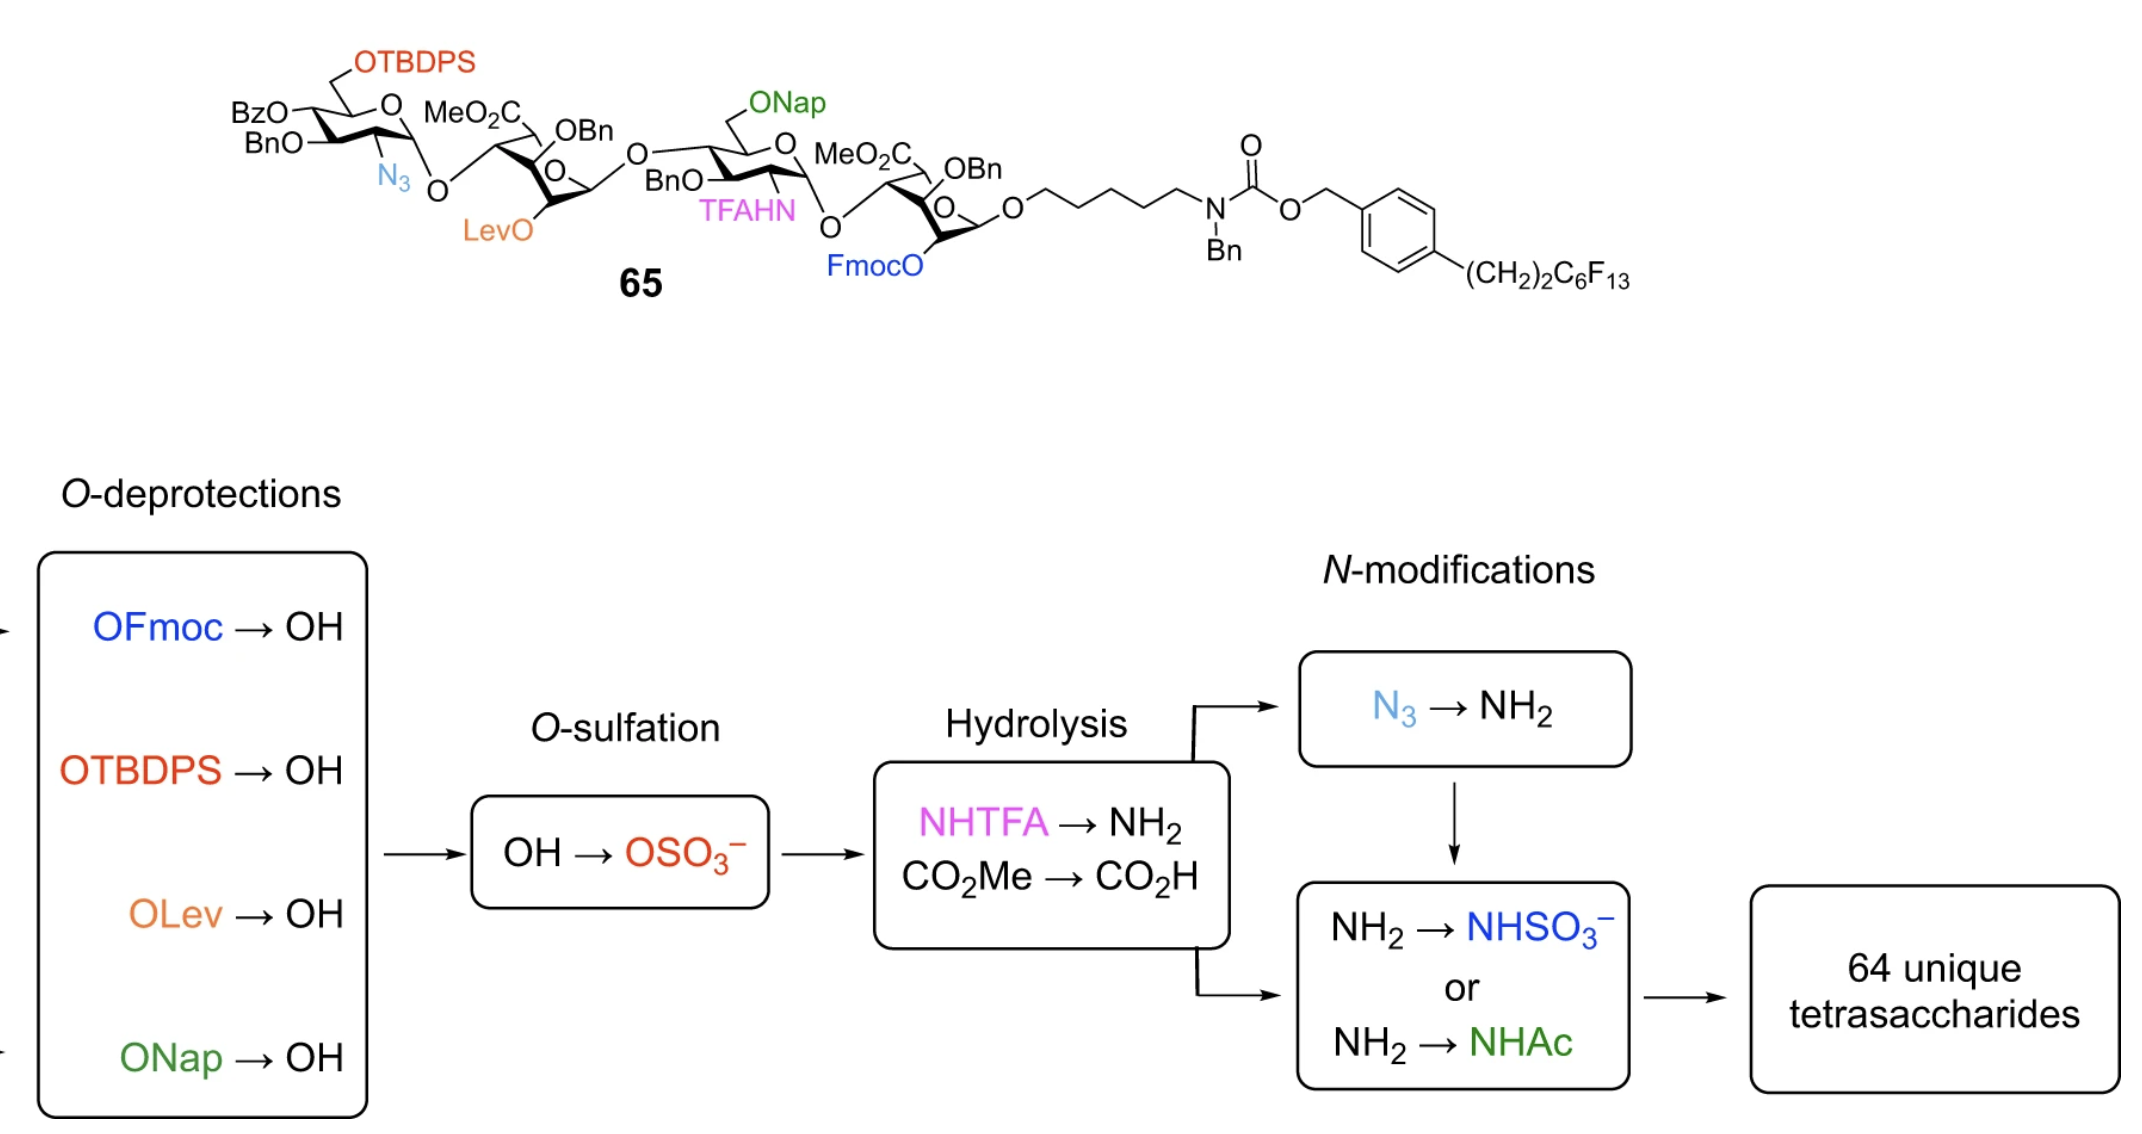 Efficient Platform for Synthesizing Comprehensive Heparan Sulfate Oligosaccharide Libraries for Decoding Glycosaminoglycan-Protein Interactions